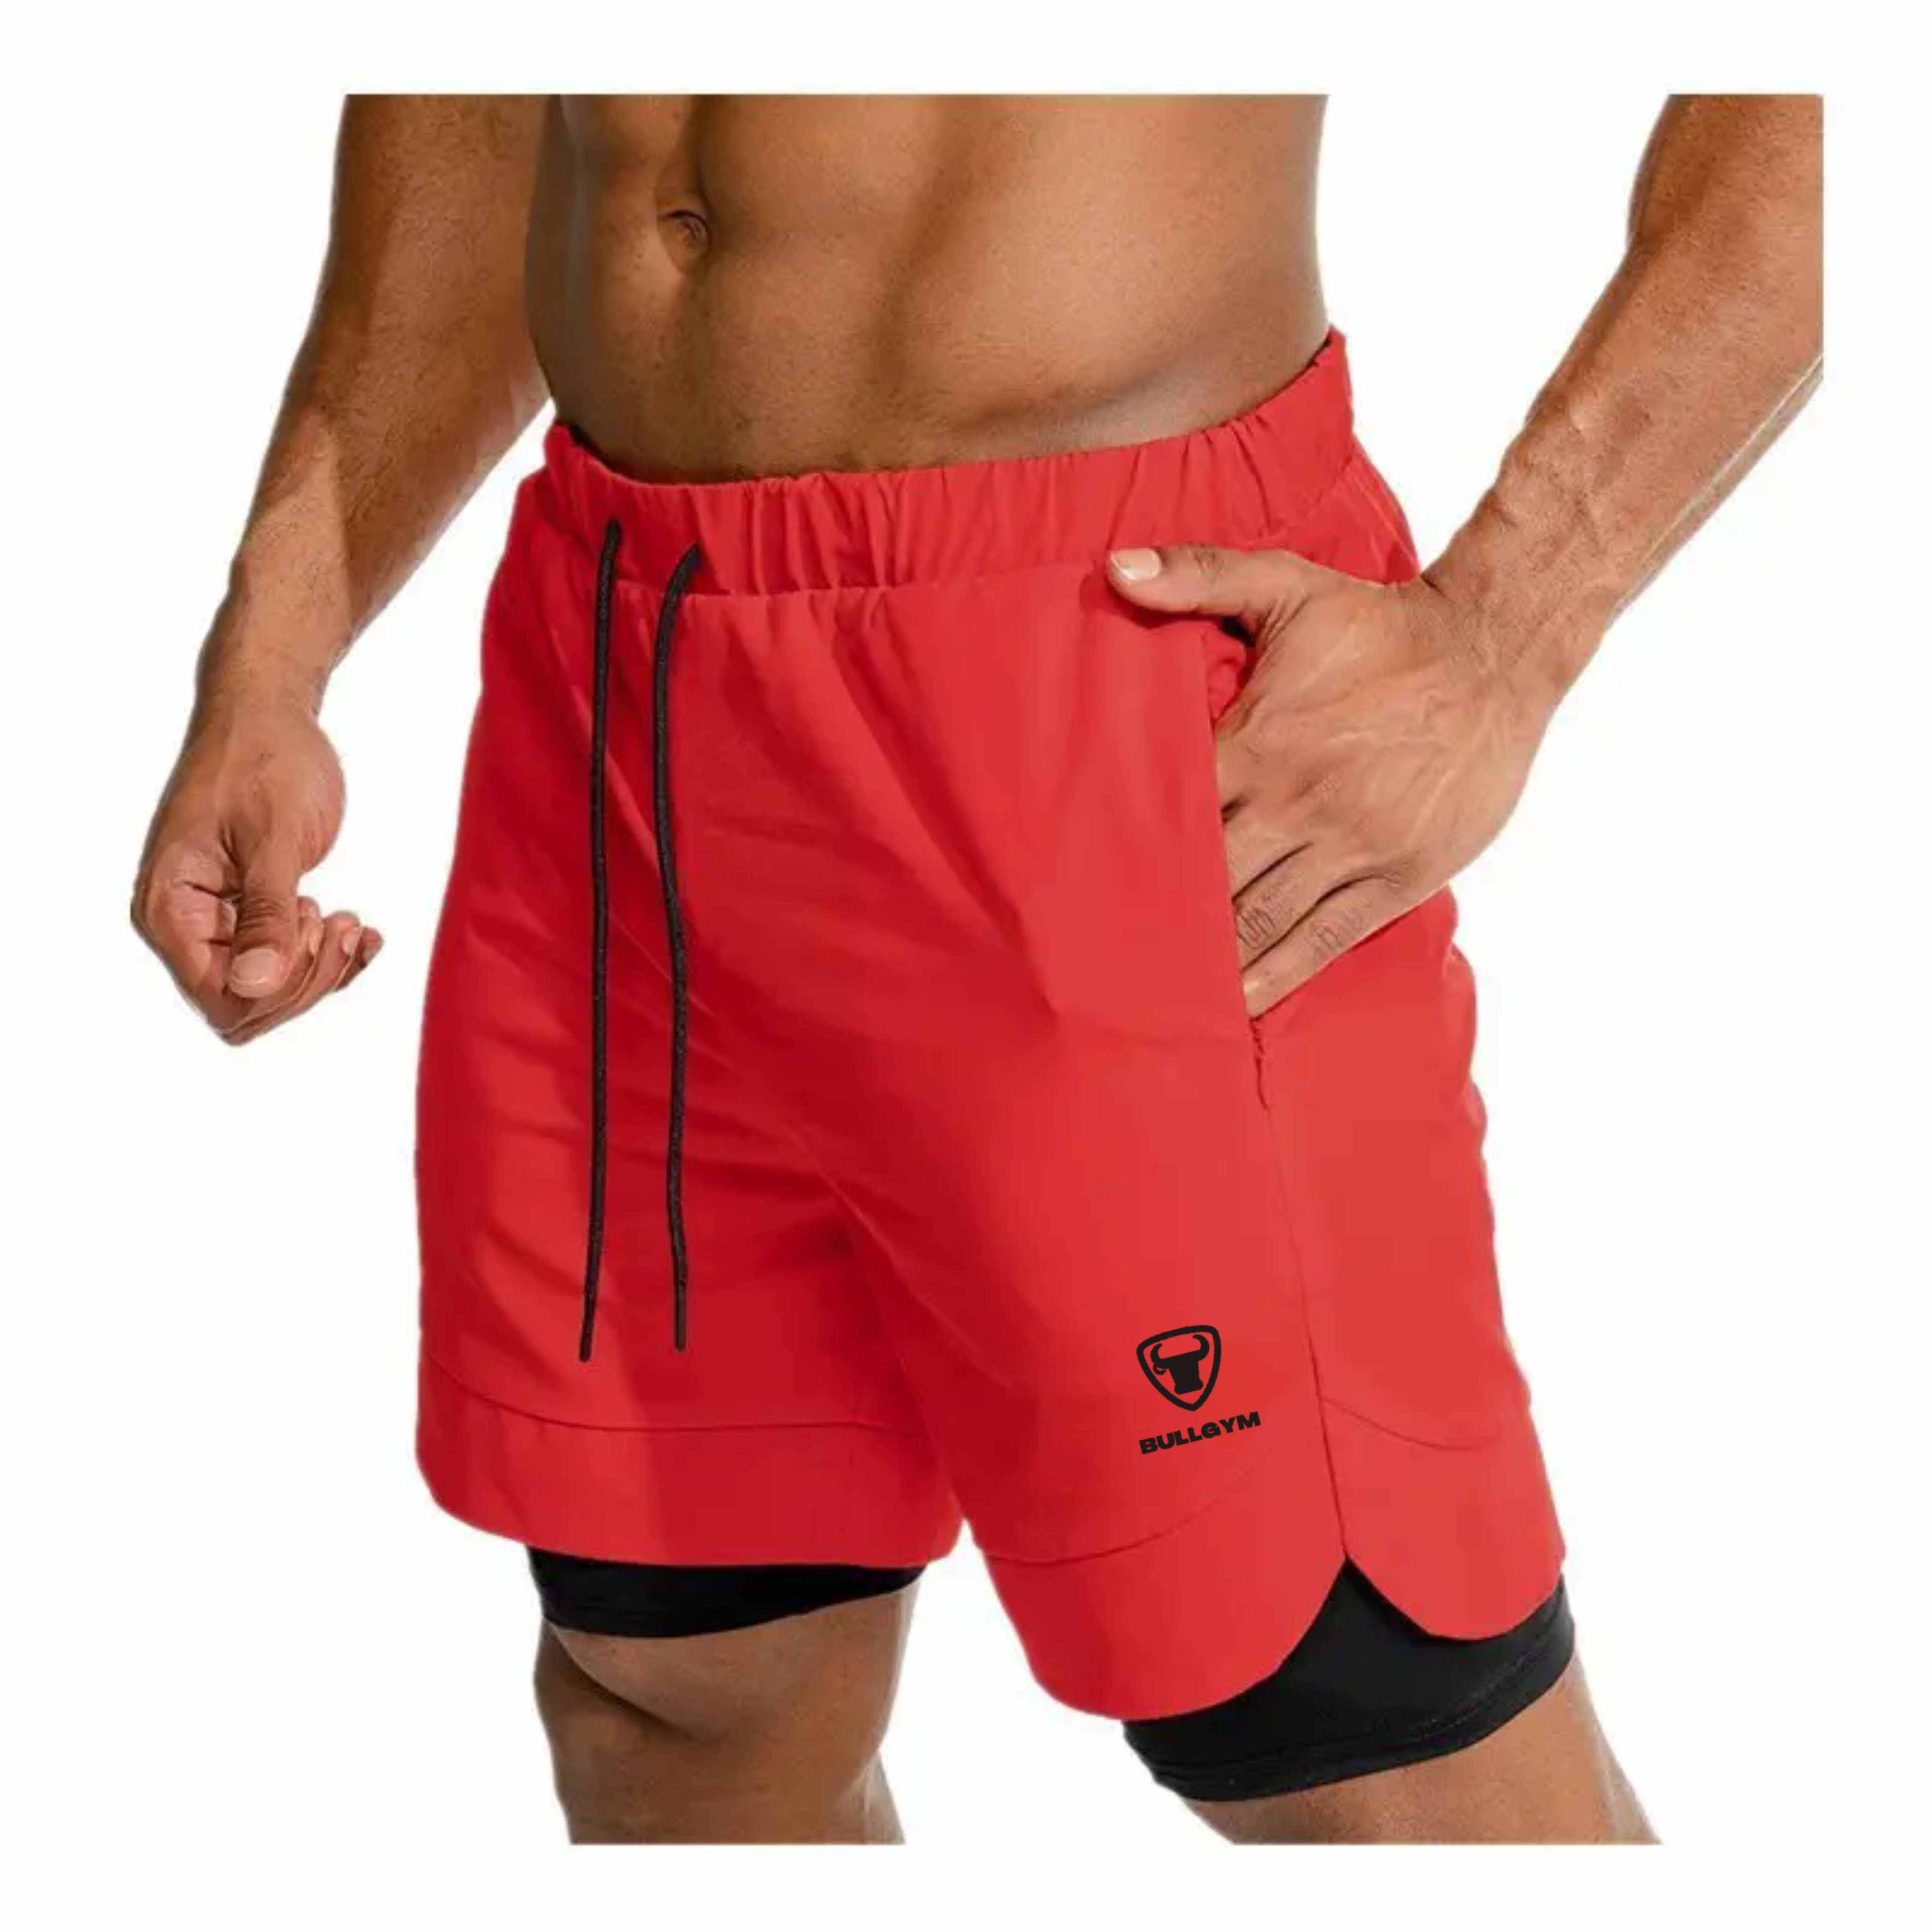 STAMINA SHORT - CANDY RED